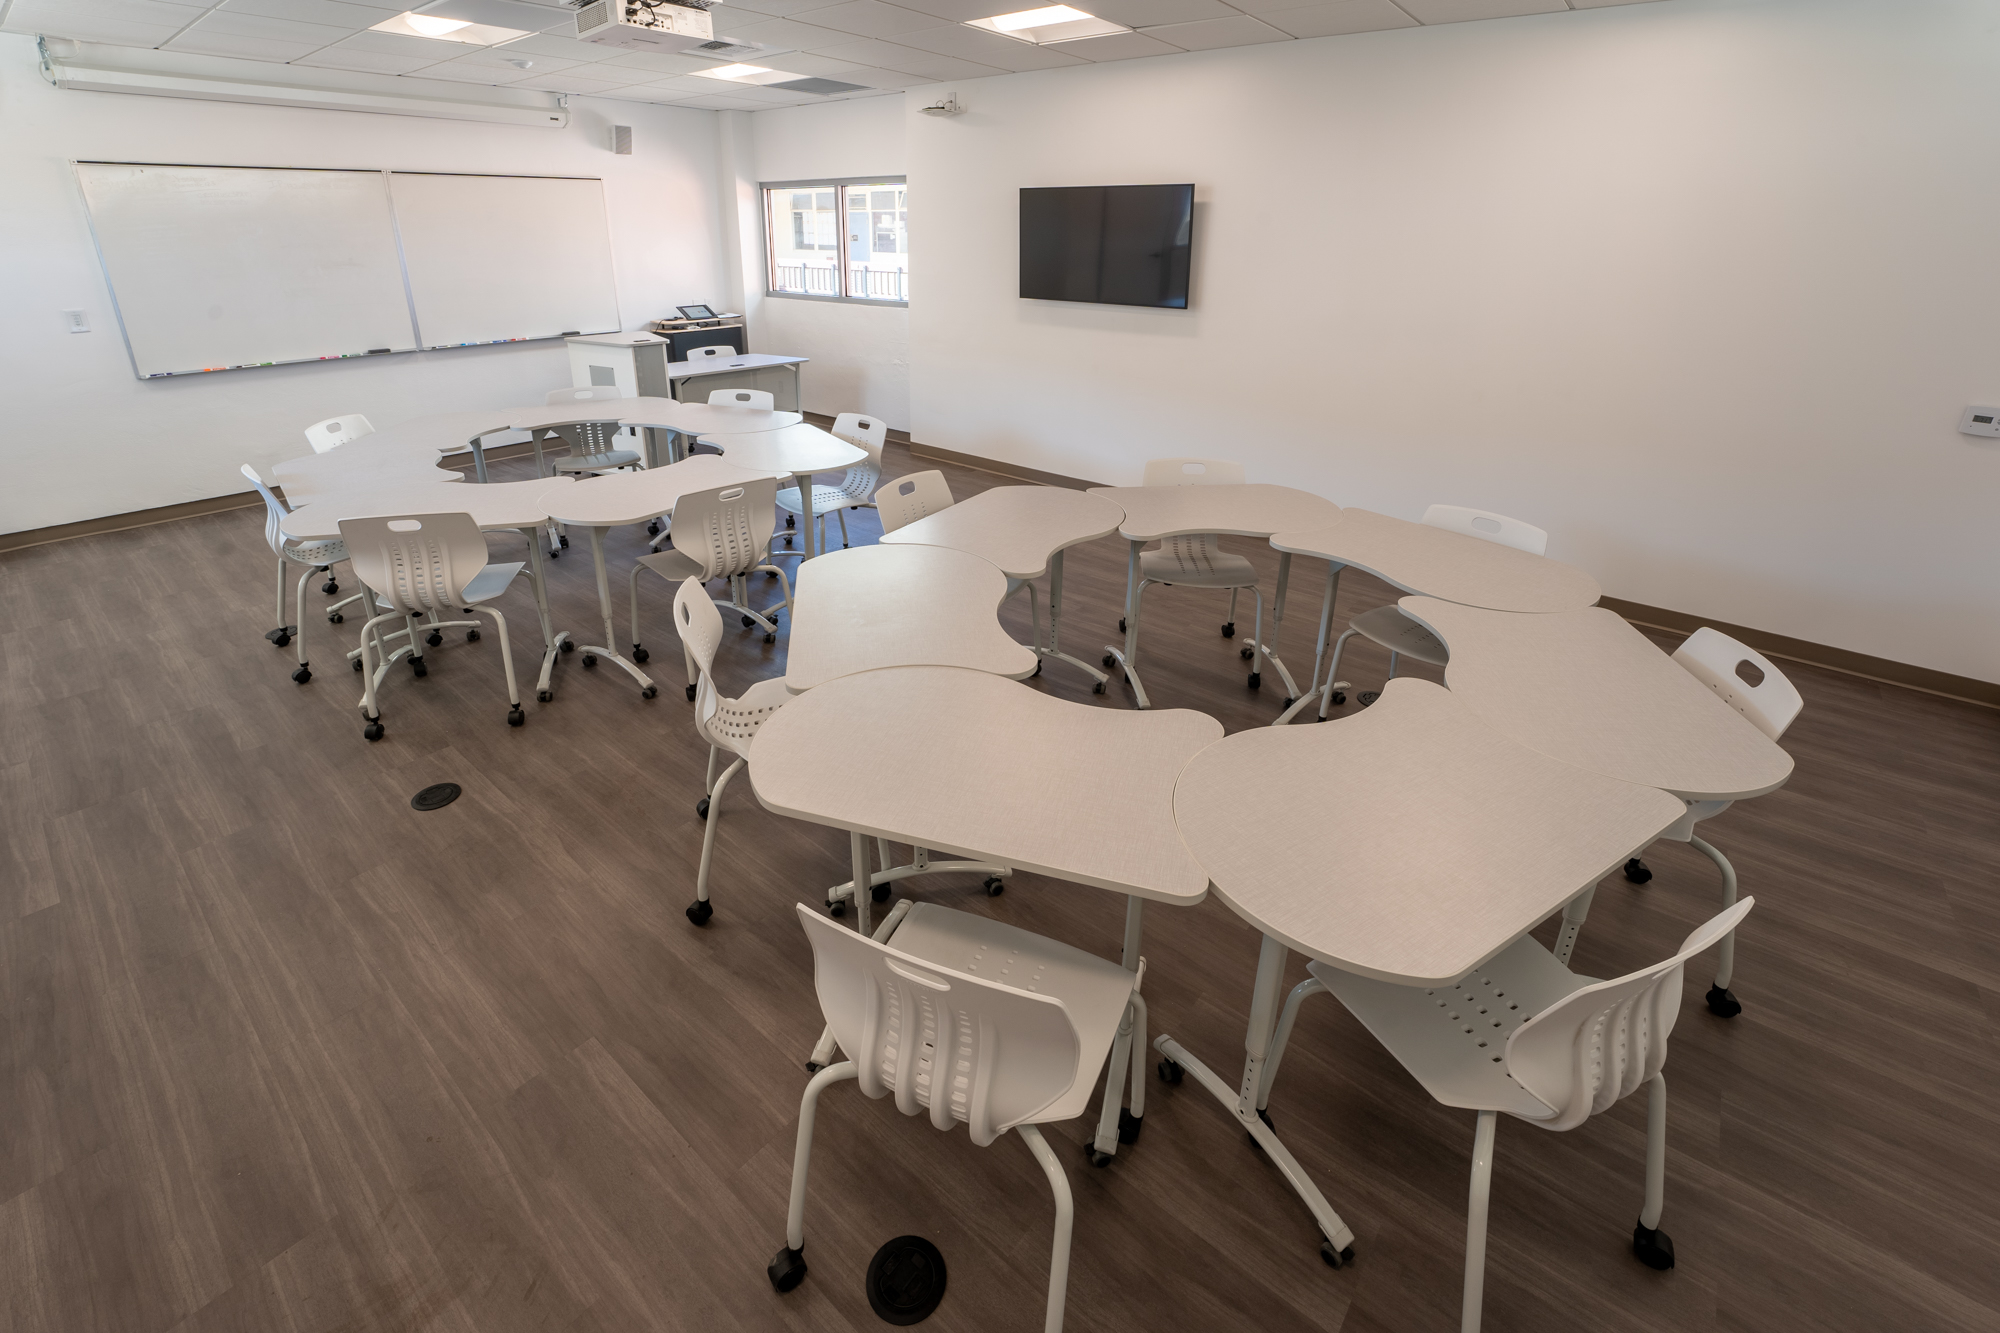 a classroom with white board, gray flooring, and modular chairs and tables organized into circular configurations